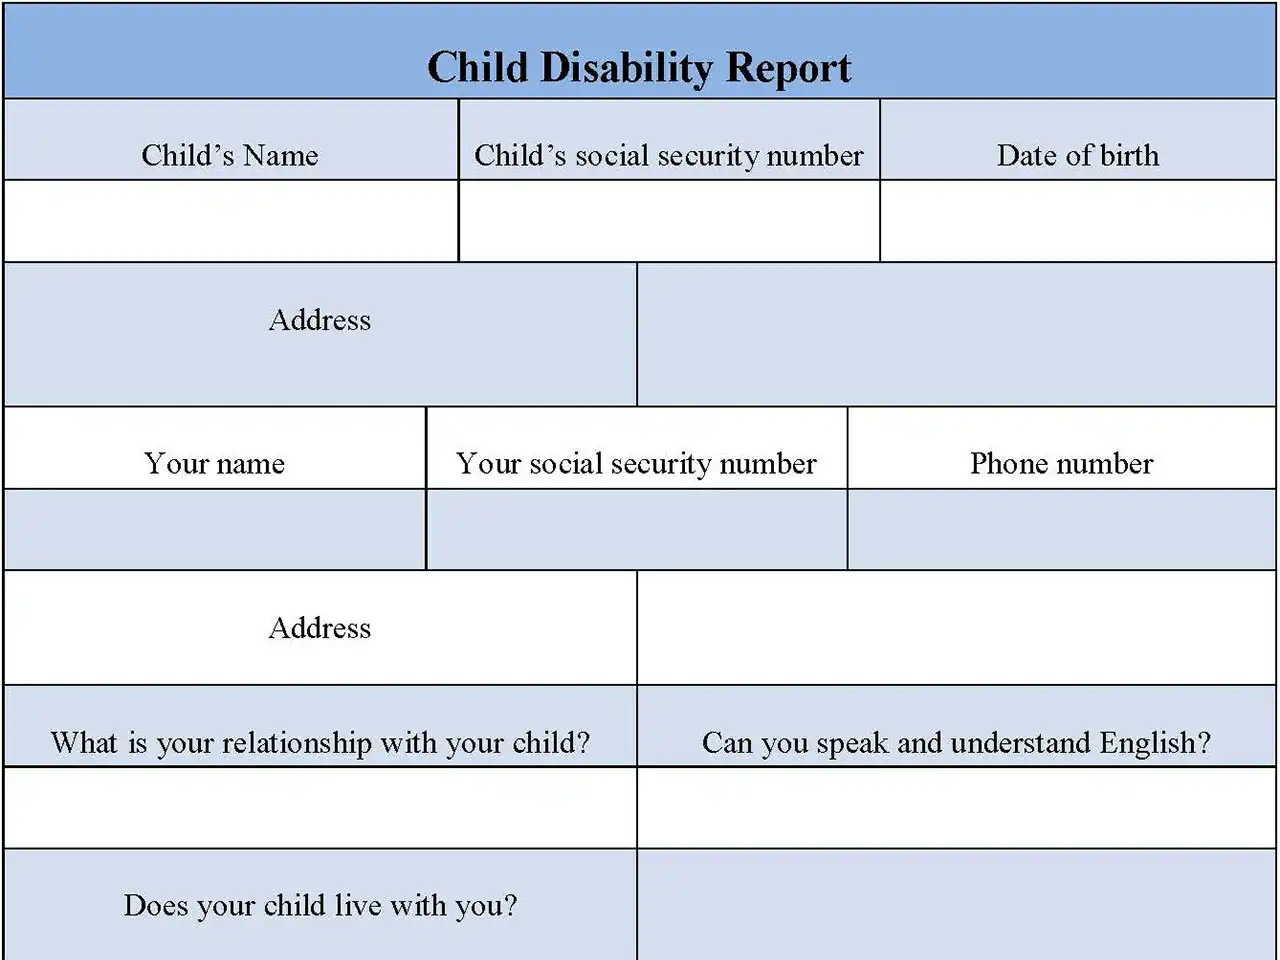 Child Disability Report Form